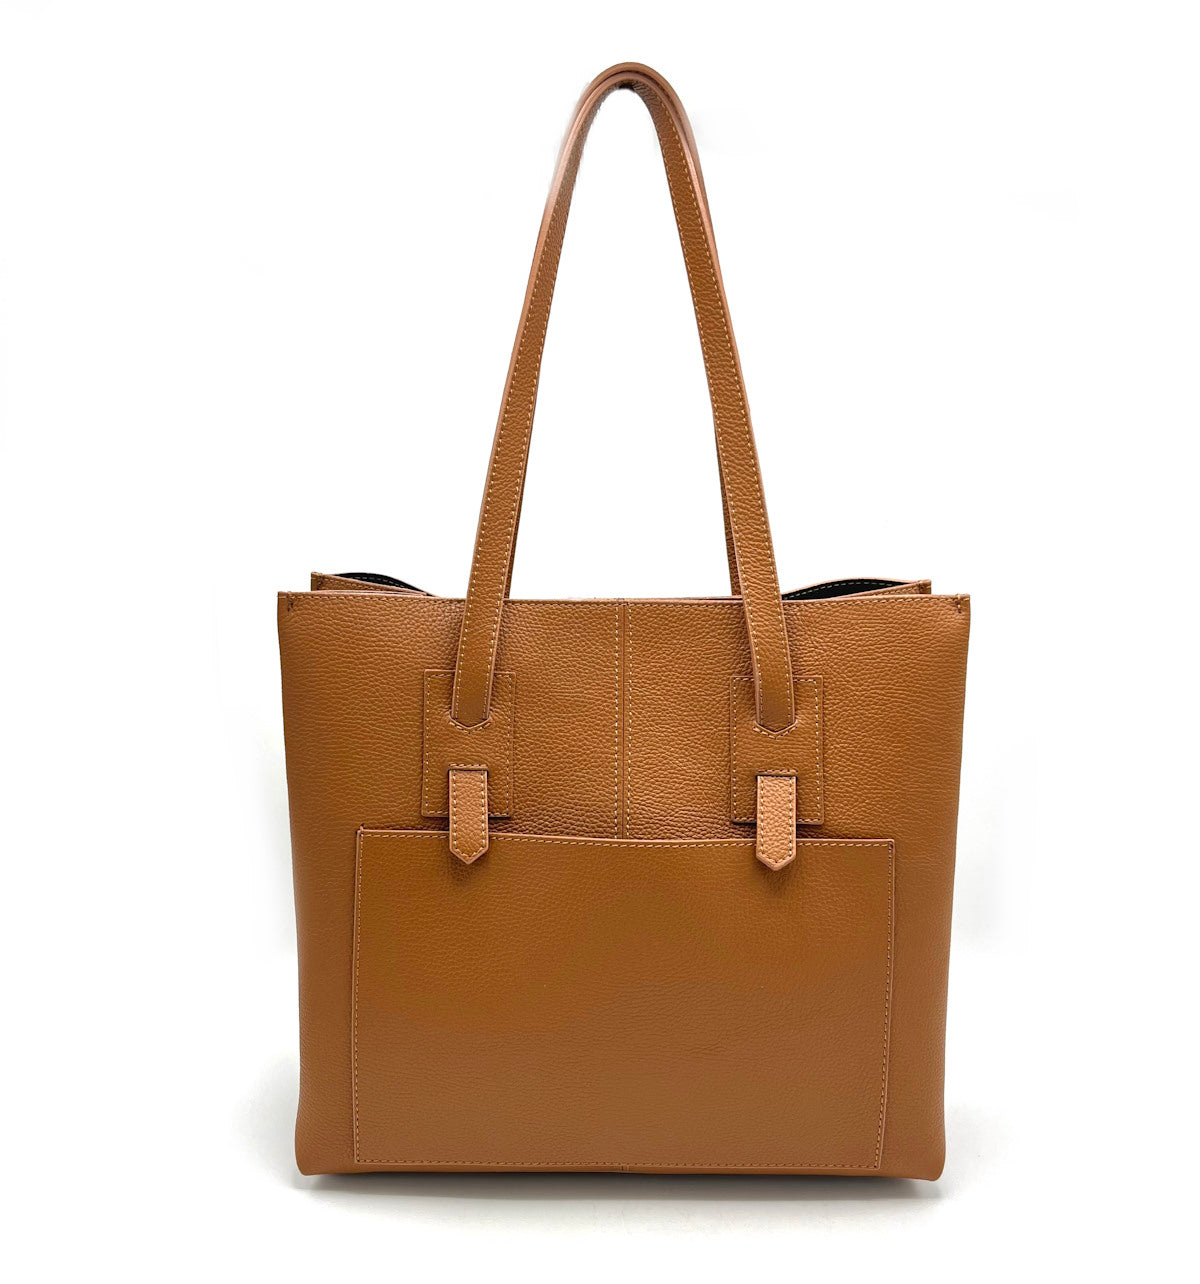 Genuine leather tote bag, Made in Italy, art. 112473